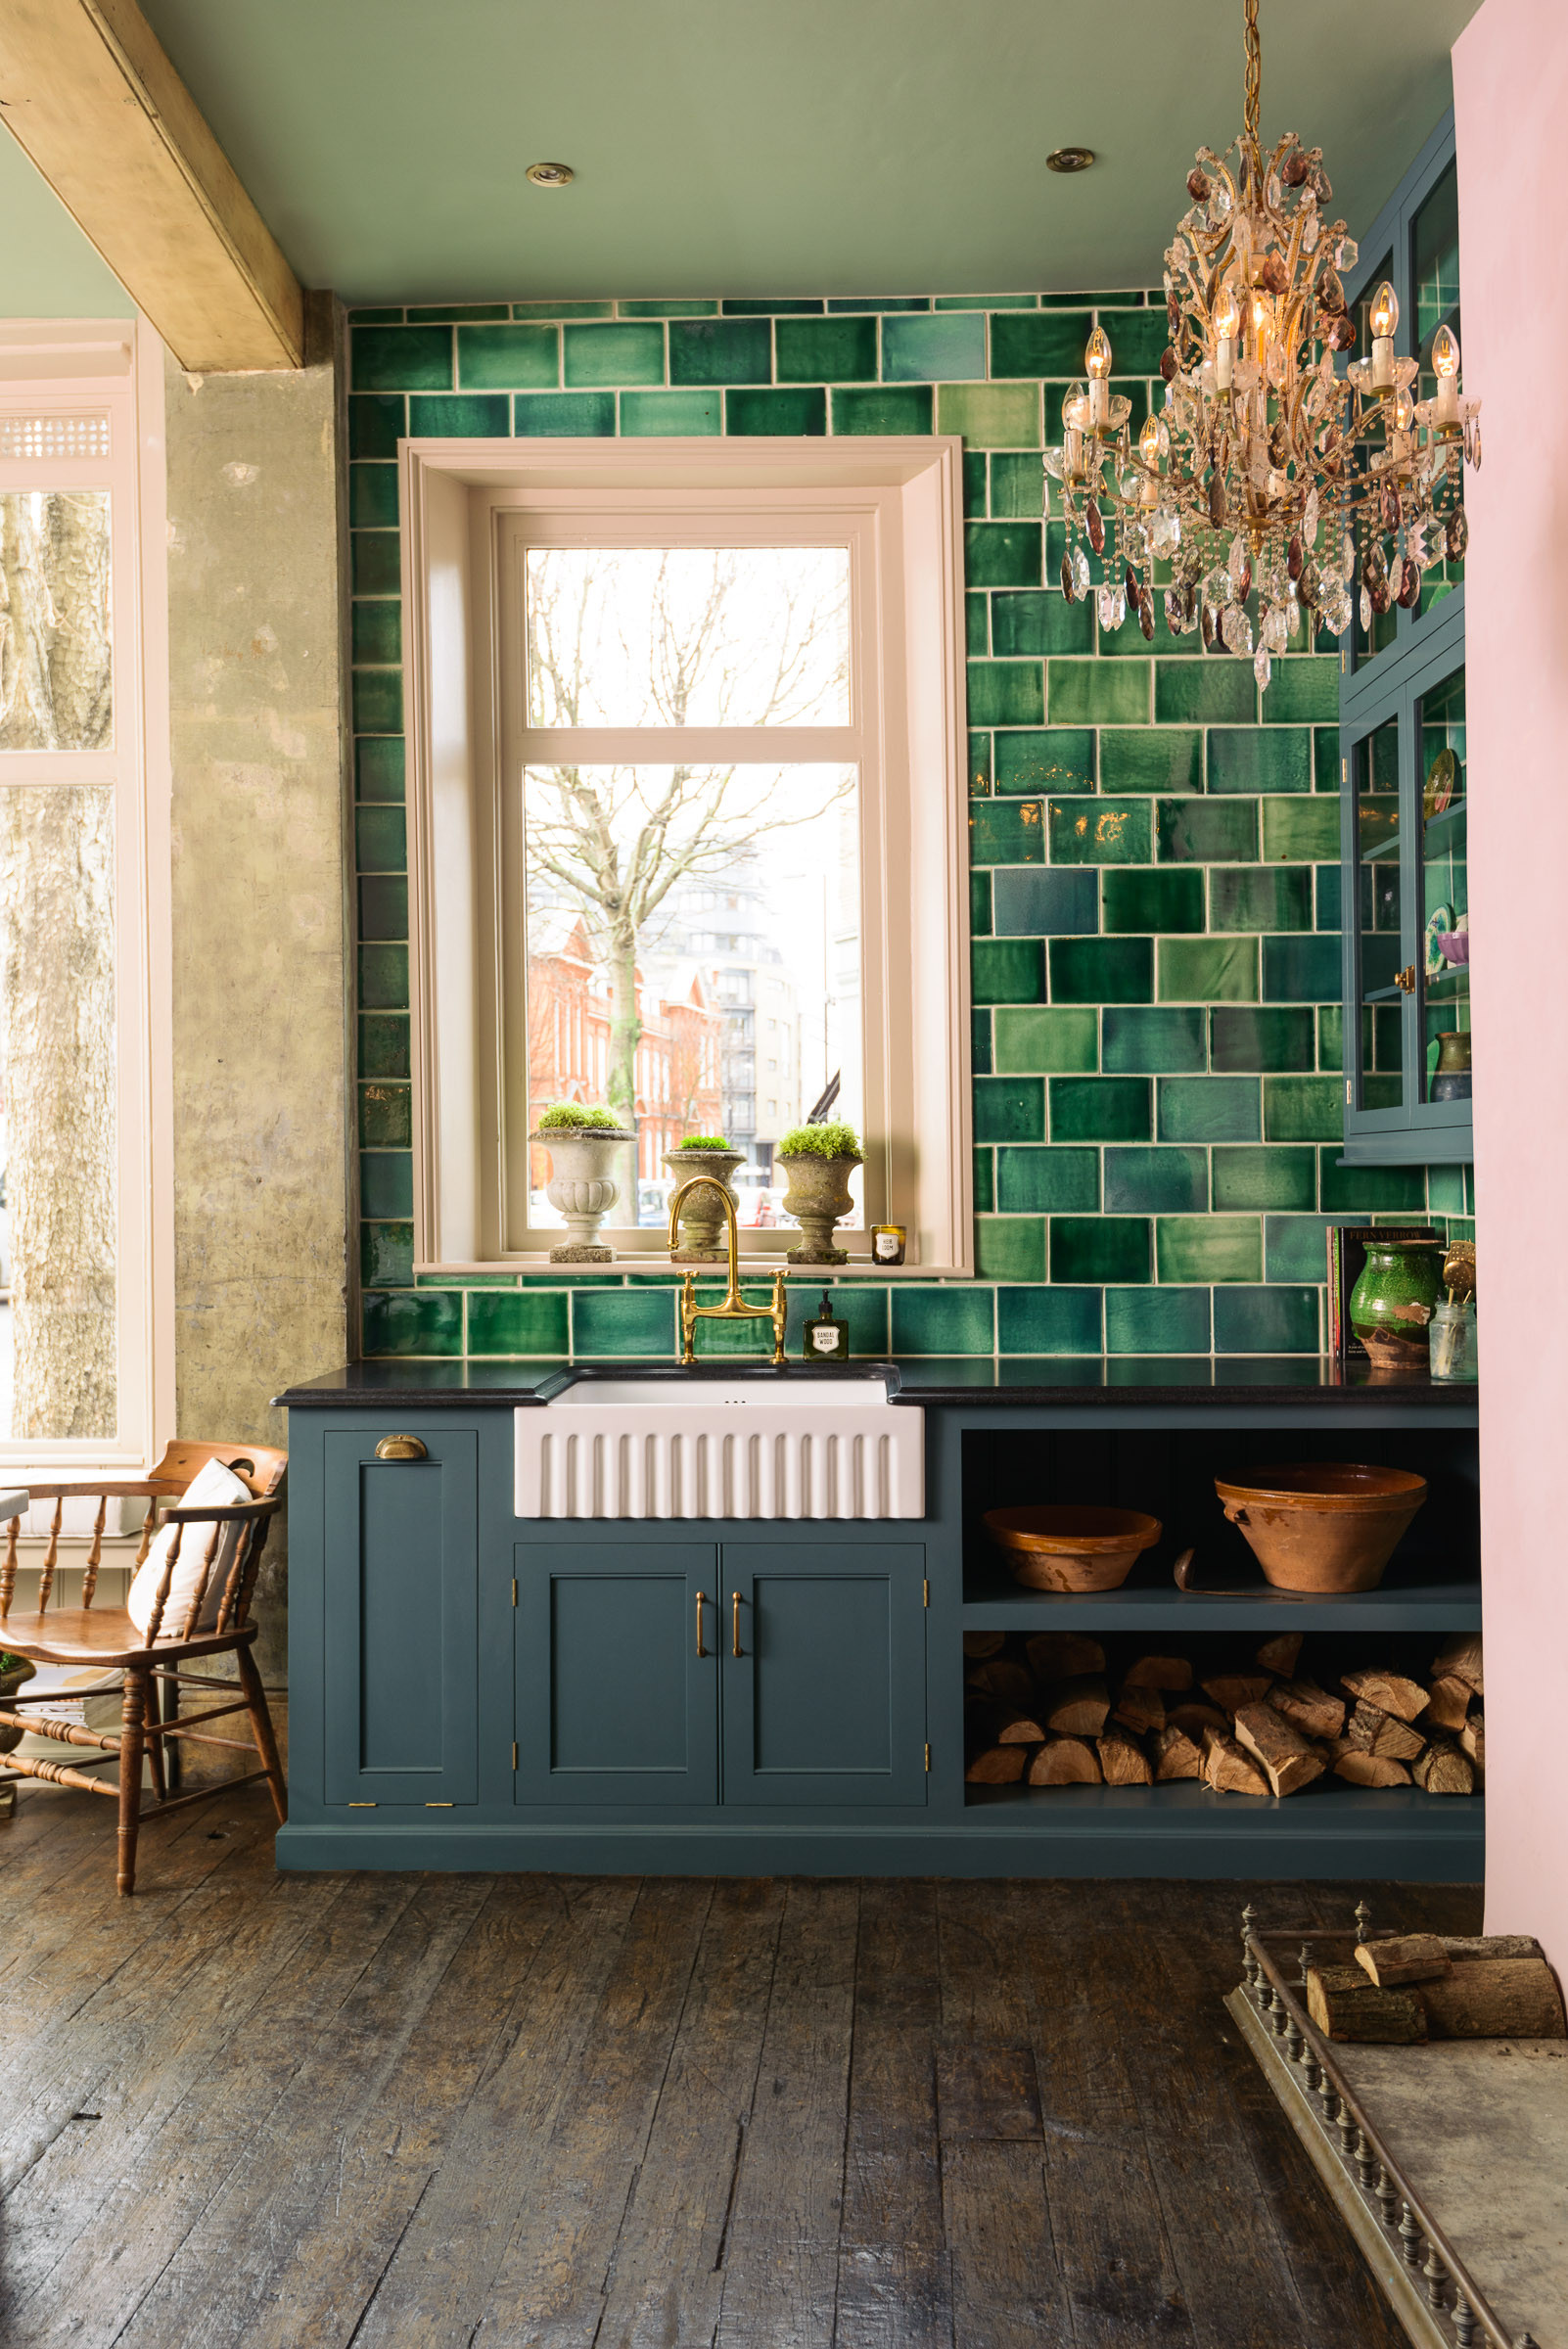 Green Kitchen Tiles
 A random collection of tips on kitchens that may e in